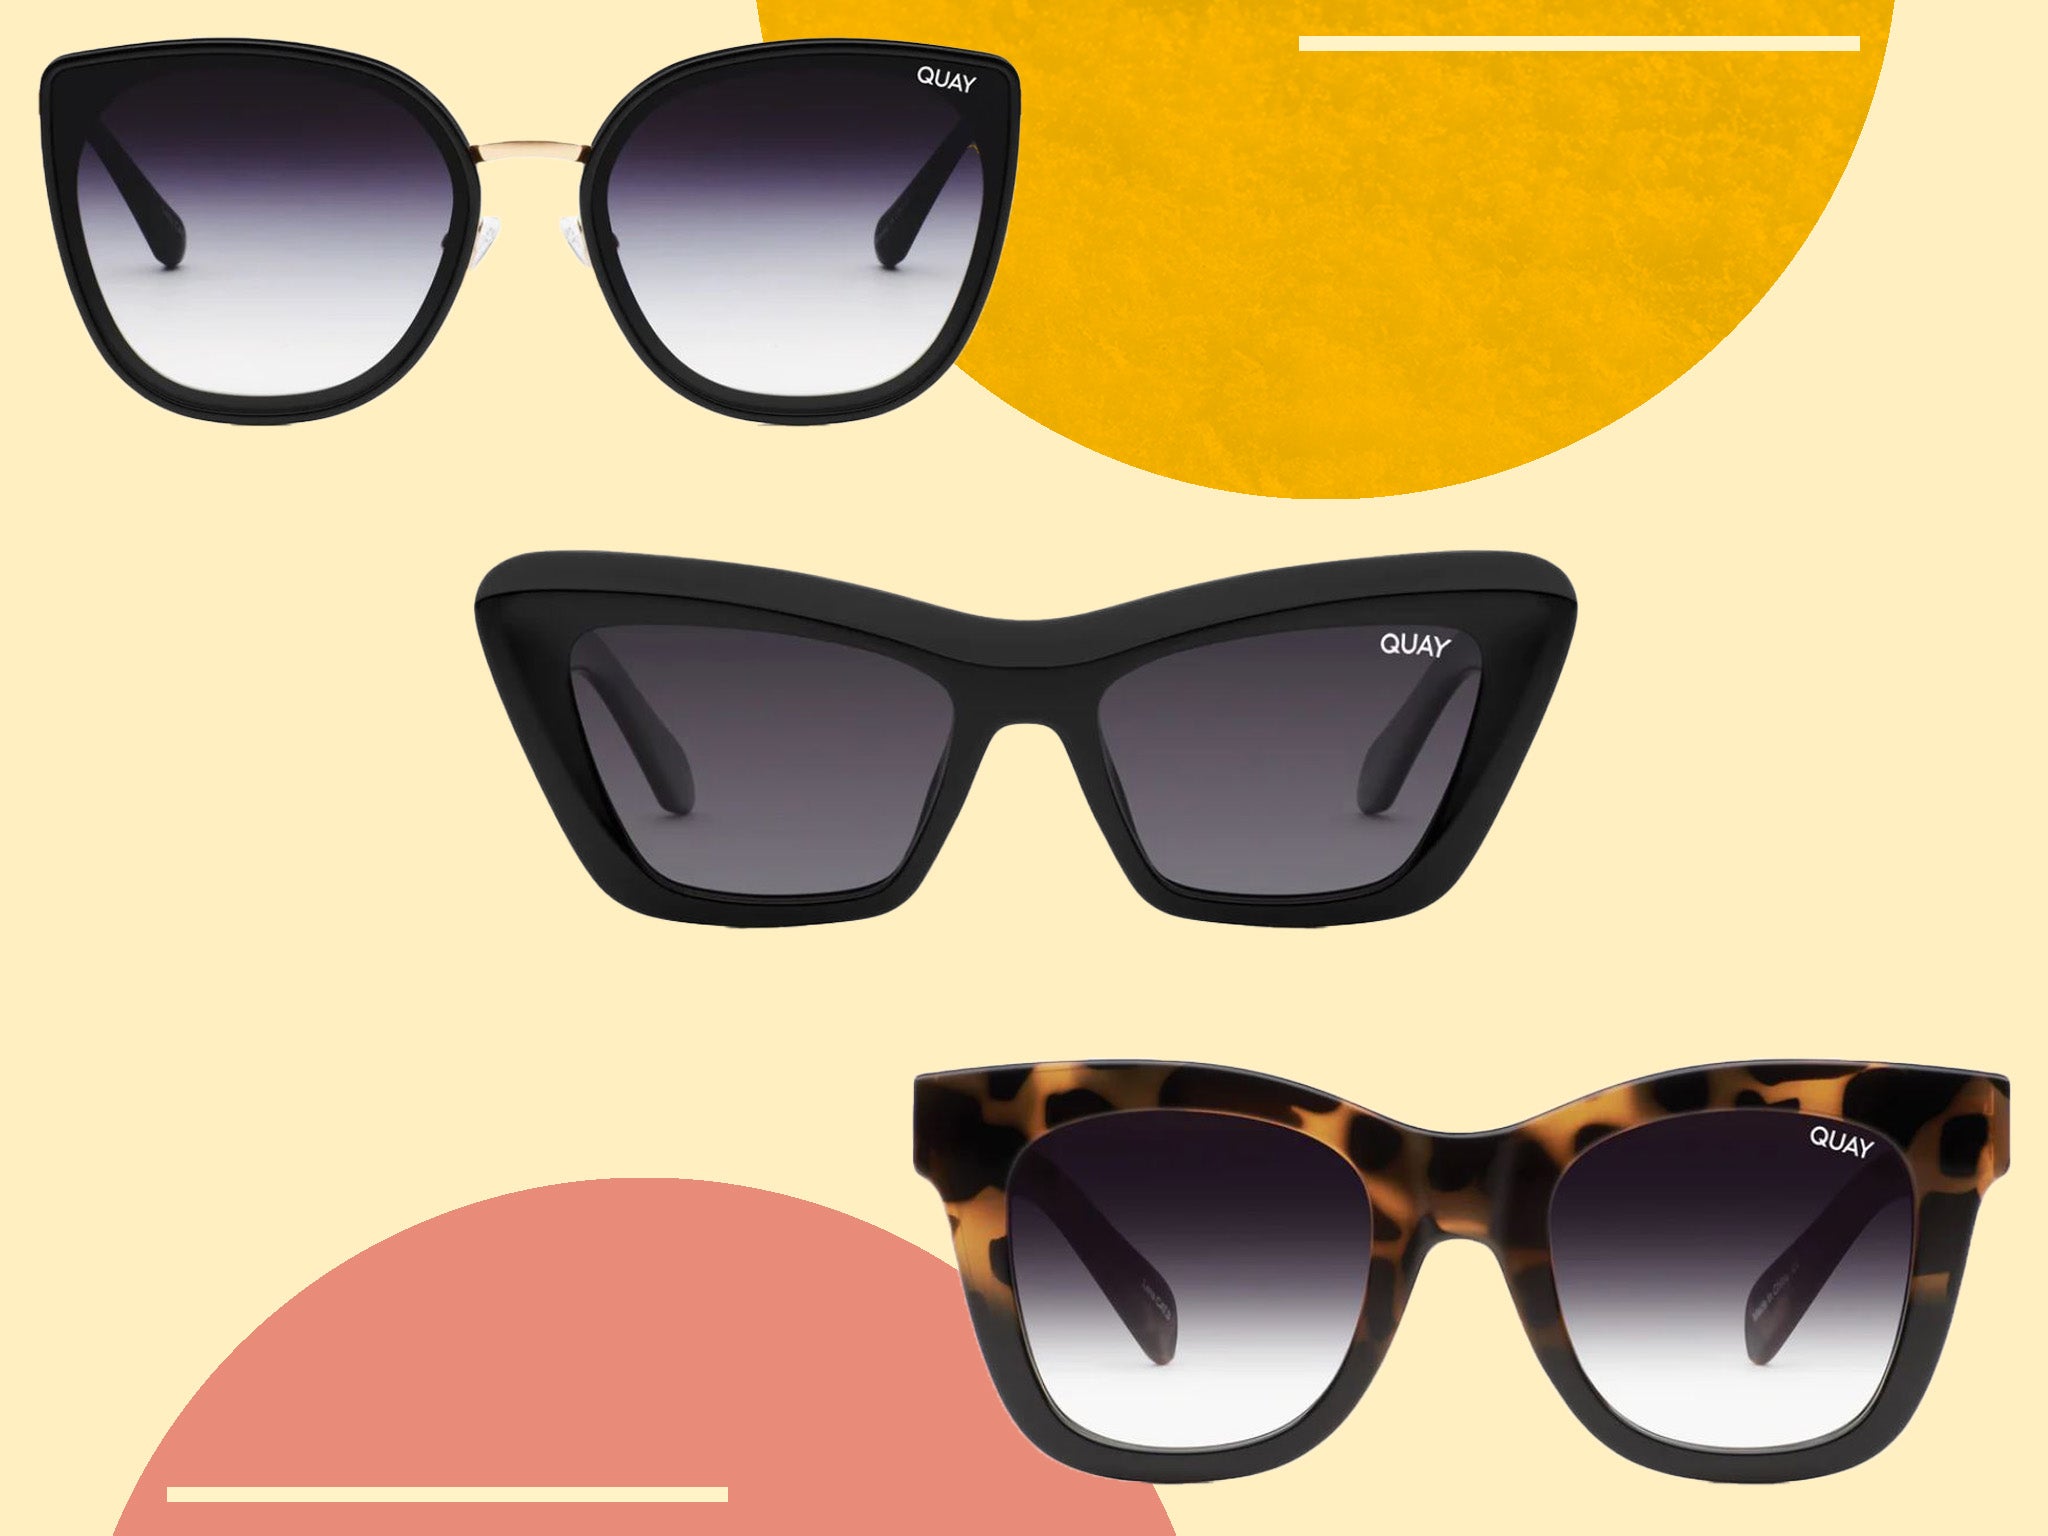 Get Shady With the Sunglasses From Love Island USA